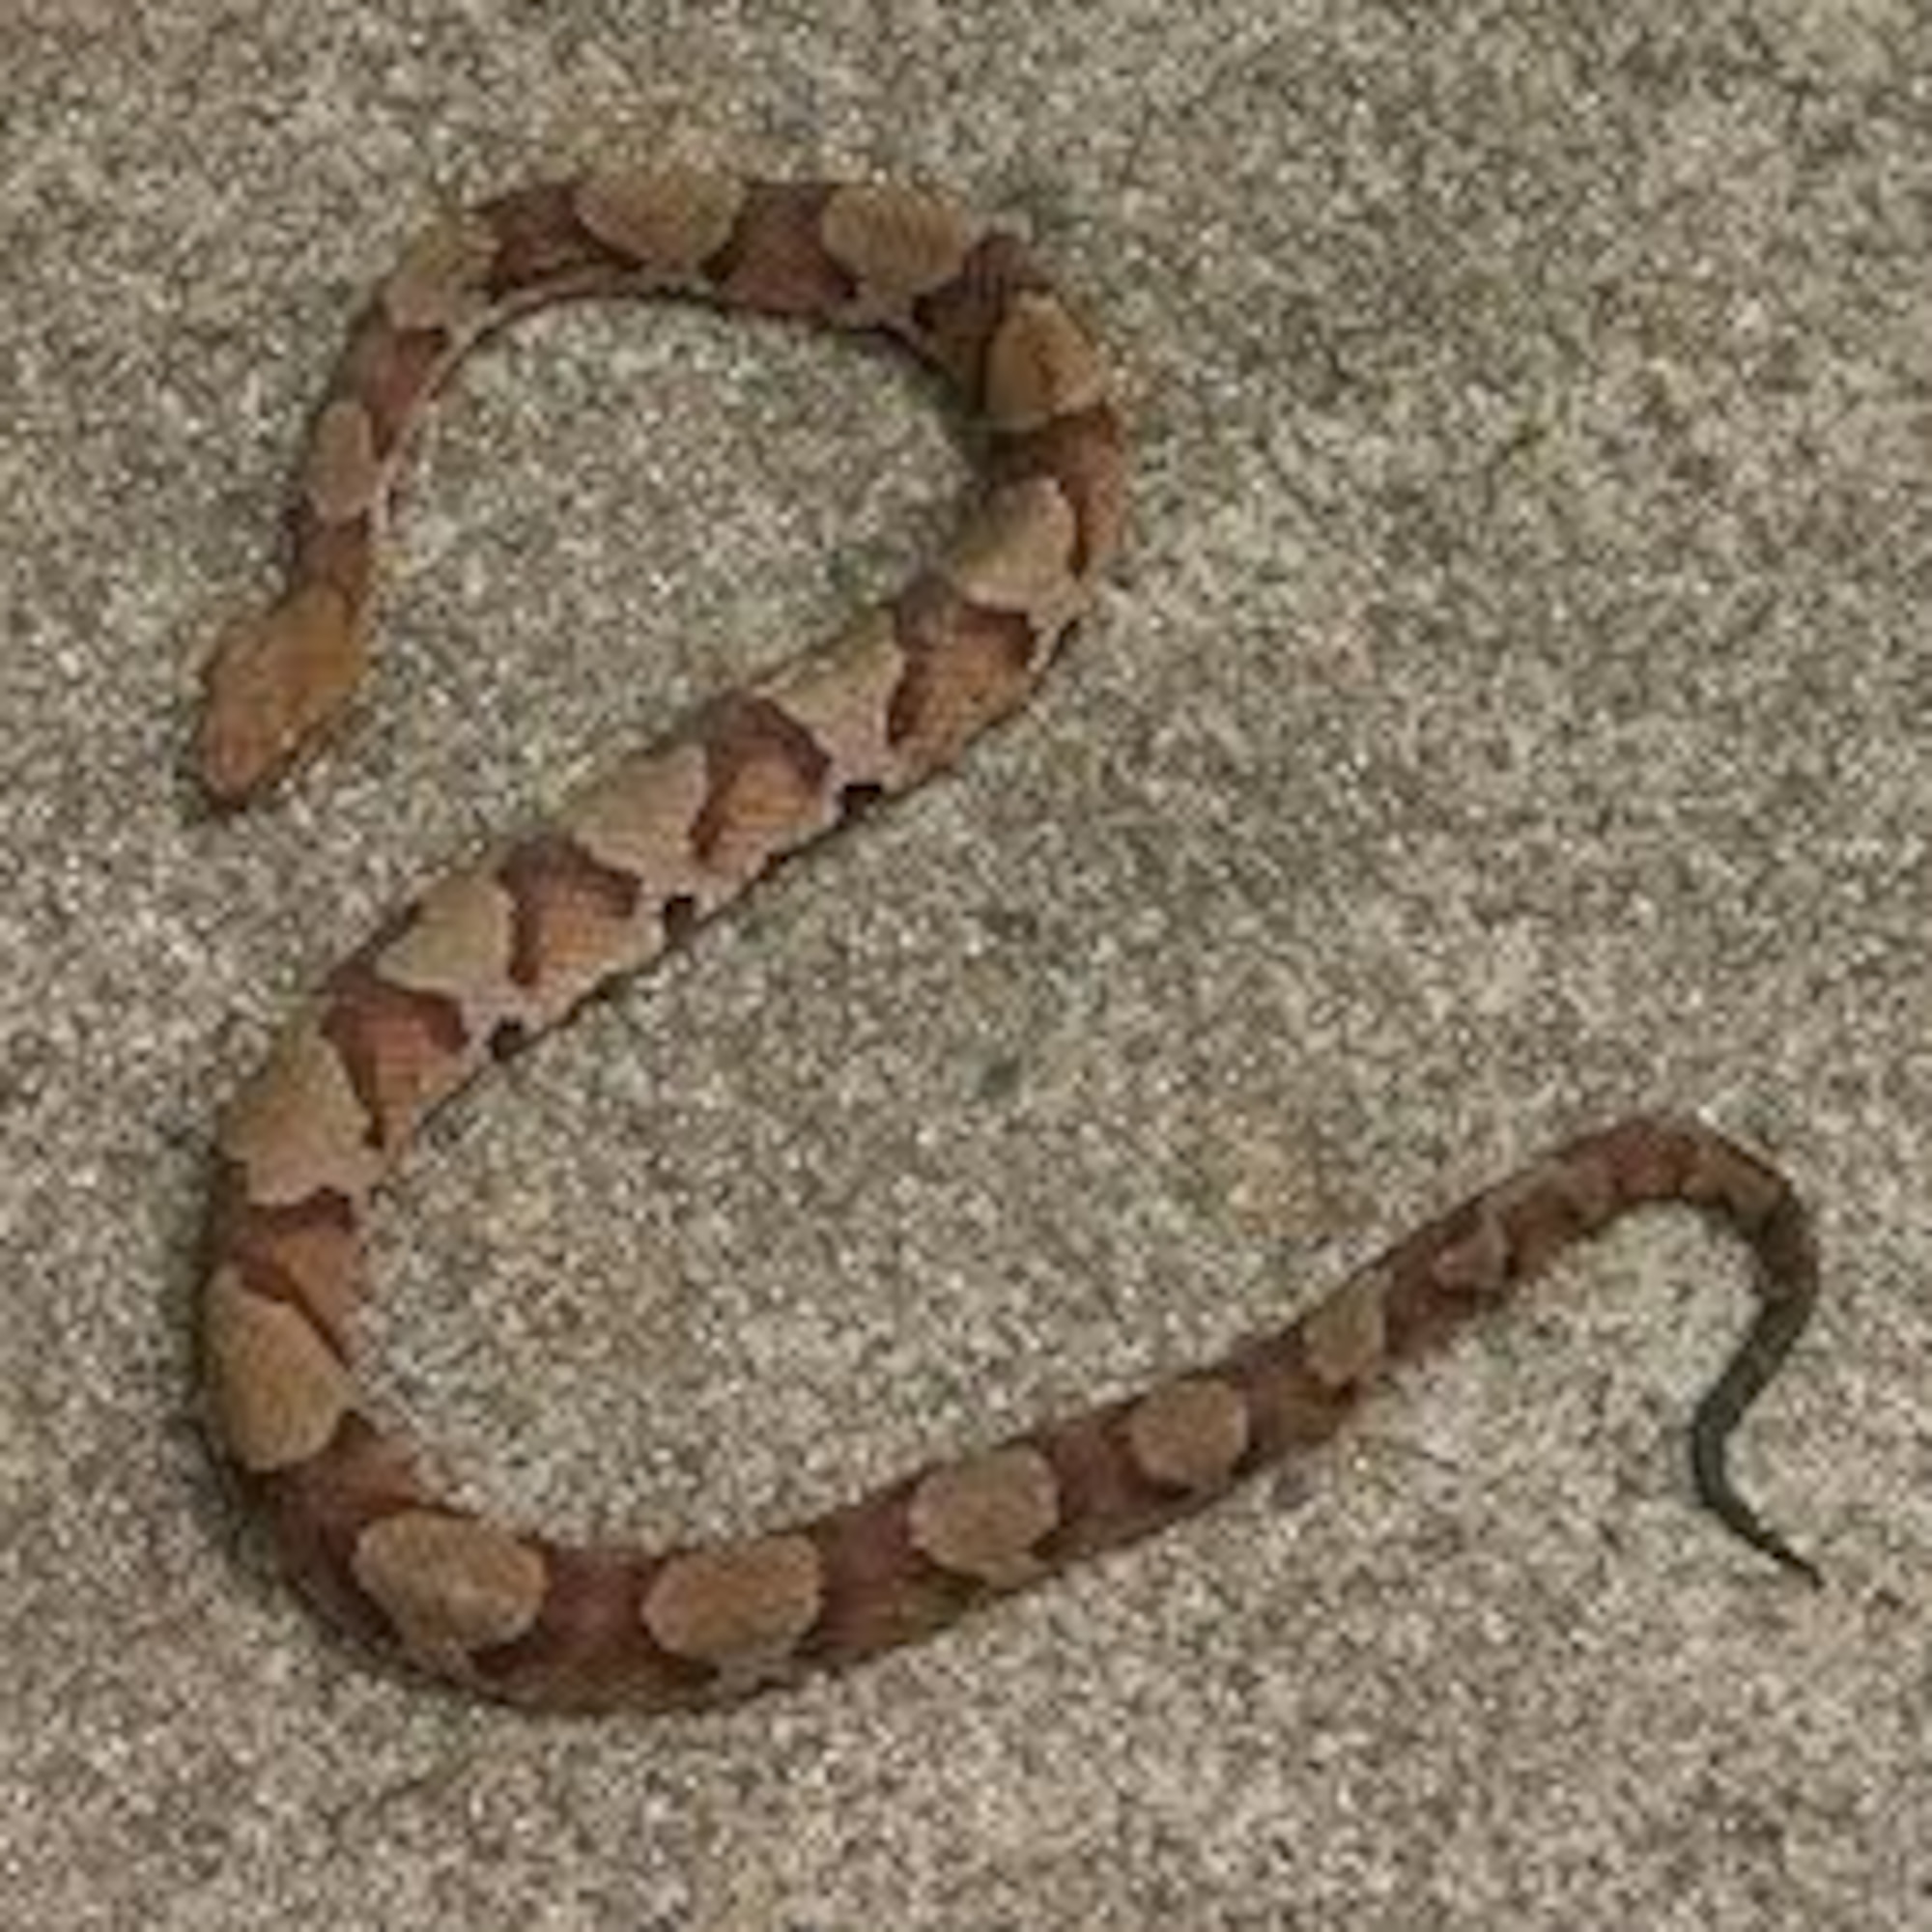 Photo of a copperhead snake, one of the three venemous snakes found in North Georgia. A runner spotted a copperhead near the running trail behind the Air Force gym recently. (courtesy photo)